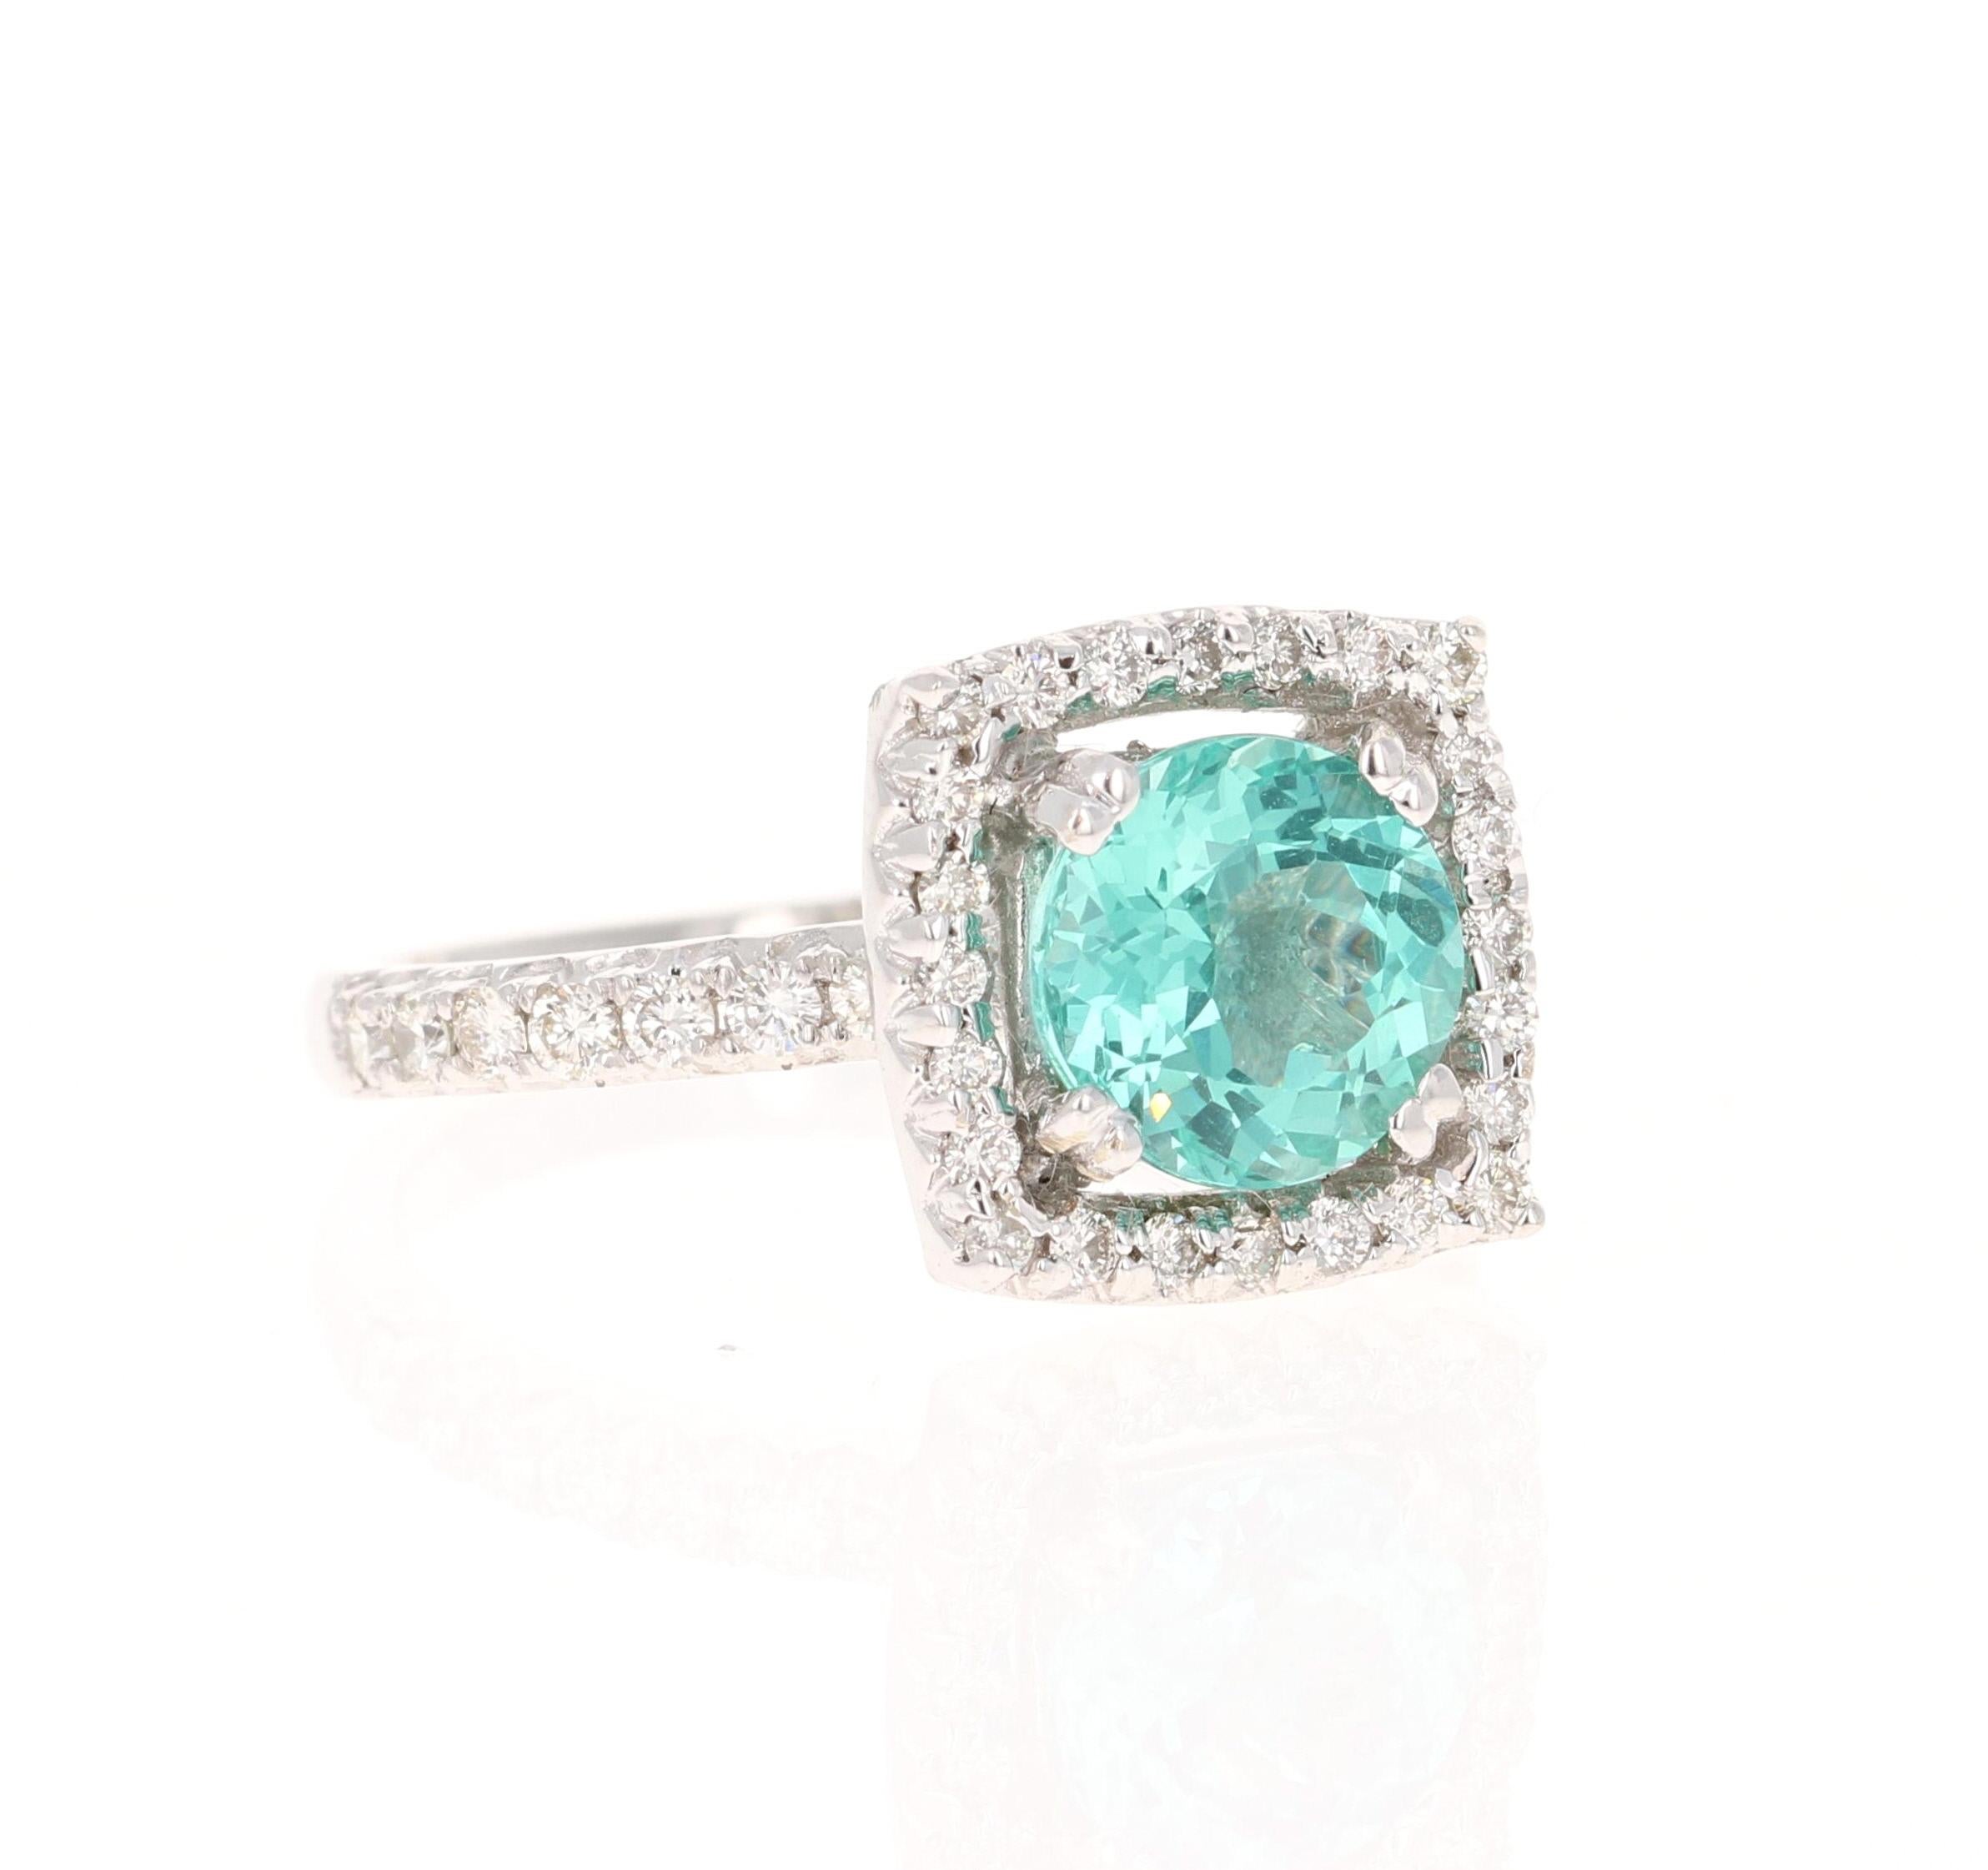 This ring has a 2.23 carat Round Cut Natural Apatite in the center of the ring and is surrounded by a halo of 56 Round Cut Natural Diamonds that weigh 0.72 carats. The clarity of the diamonds are VS and the color is H. The total carat weight of the